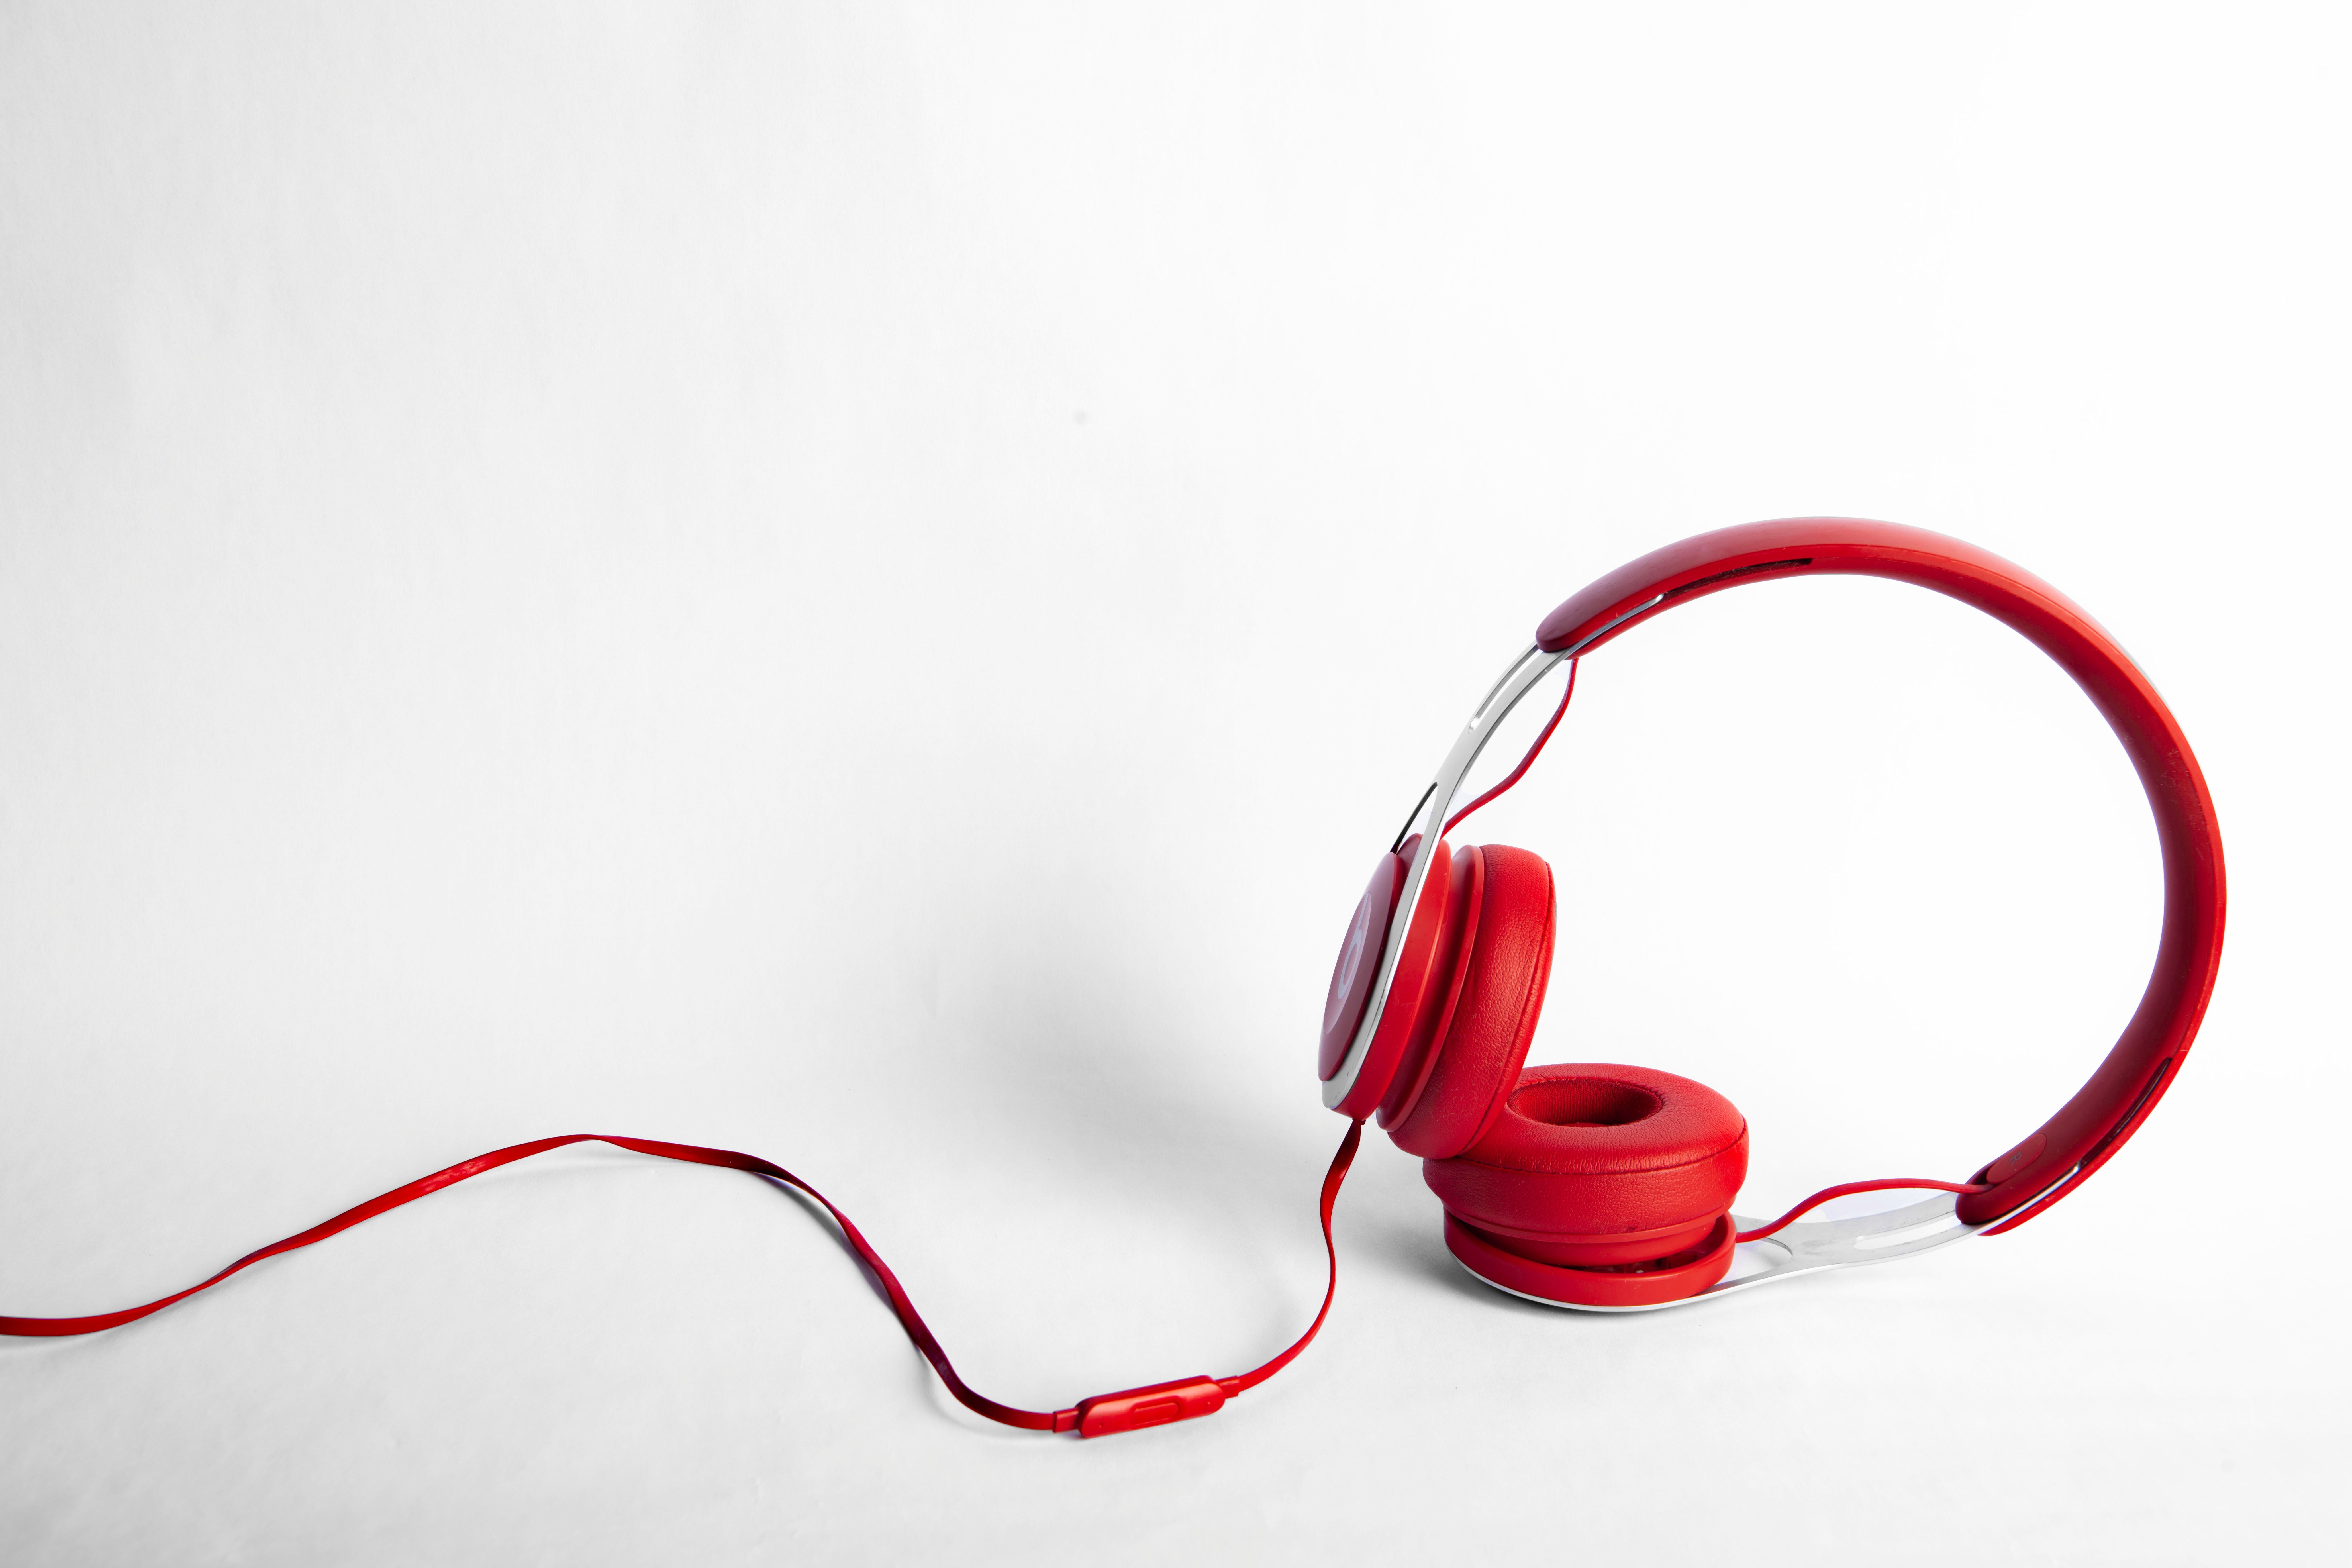 Red and silver headphones with a red wire, propped up on an all-white surface